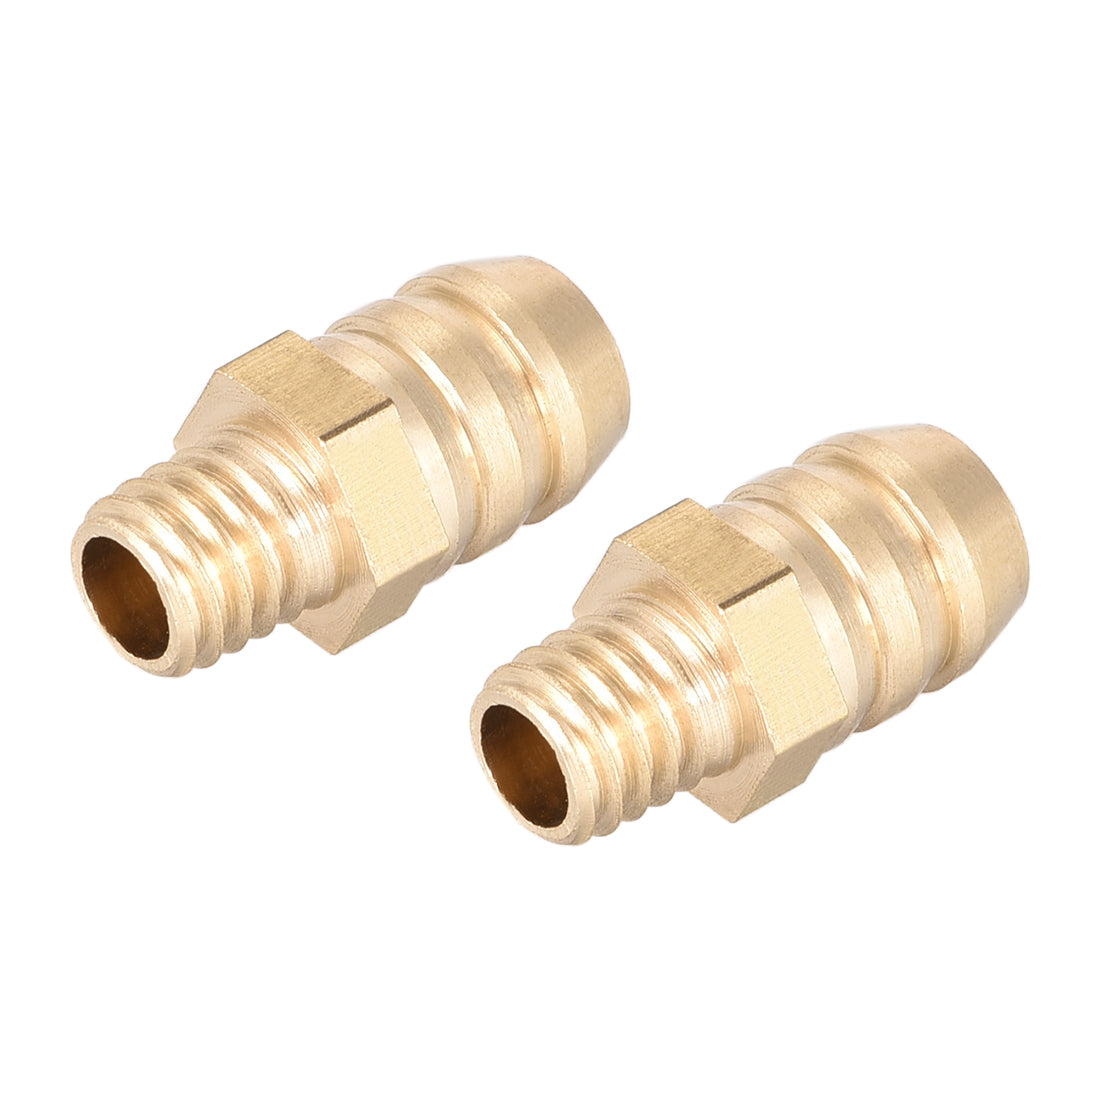 Uxcell Uxcell Brass Fitting Connector Metric M12-1.75 Male to Barb Fit Hose ID 8mm 2pcs